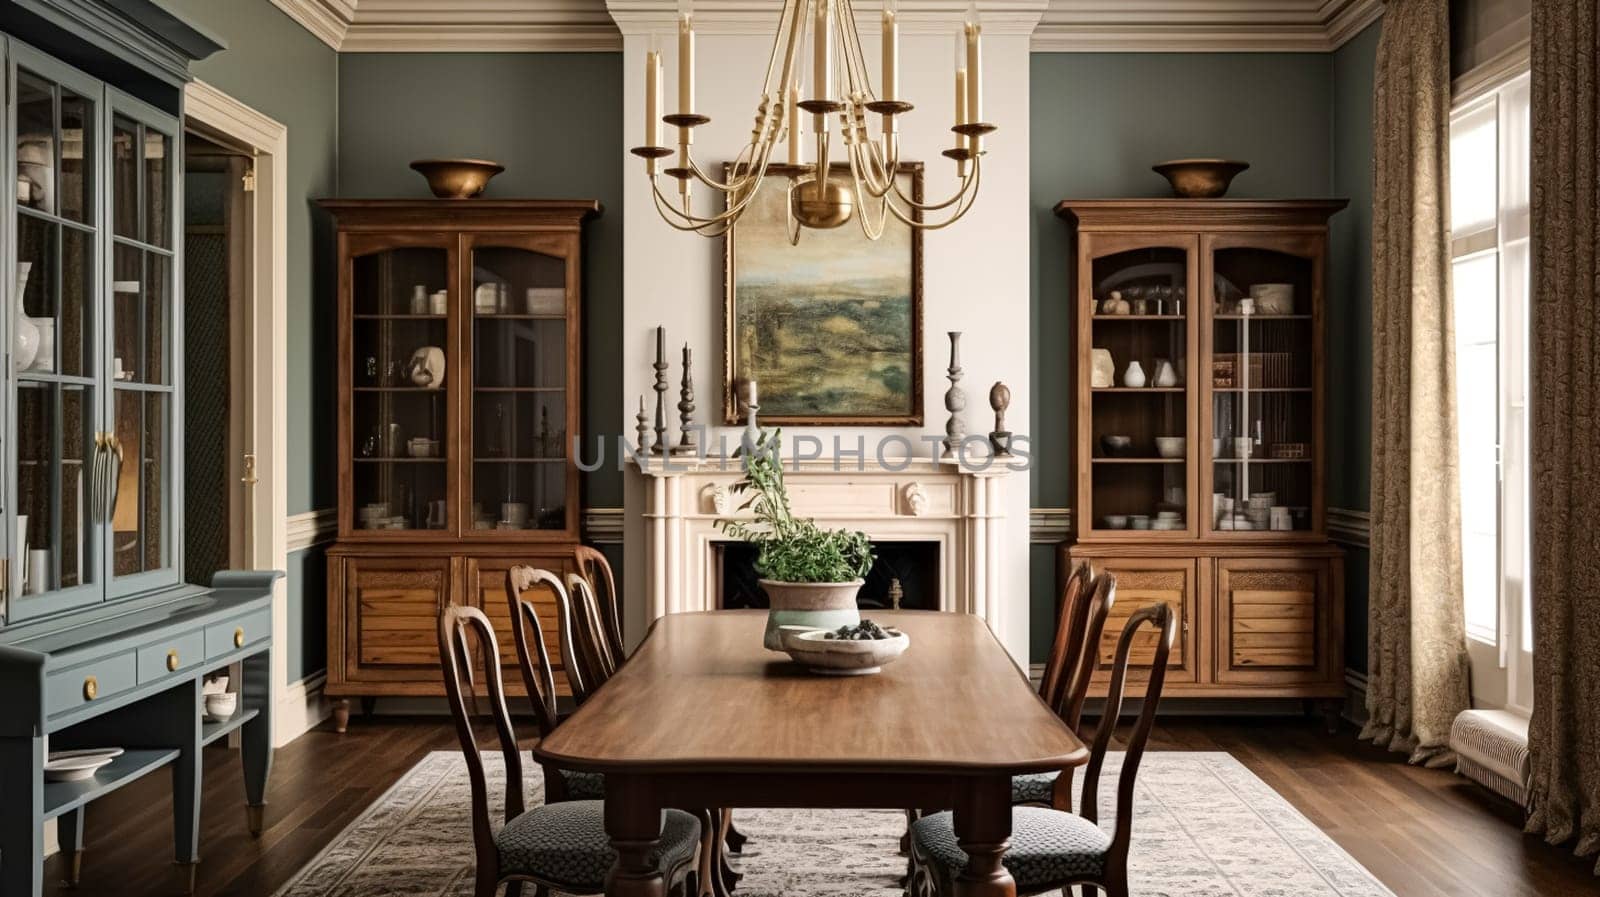 Cottage dining room decor, interior design and dark wood country house furniture, home decor, table and chairs, English countryside style interiors